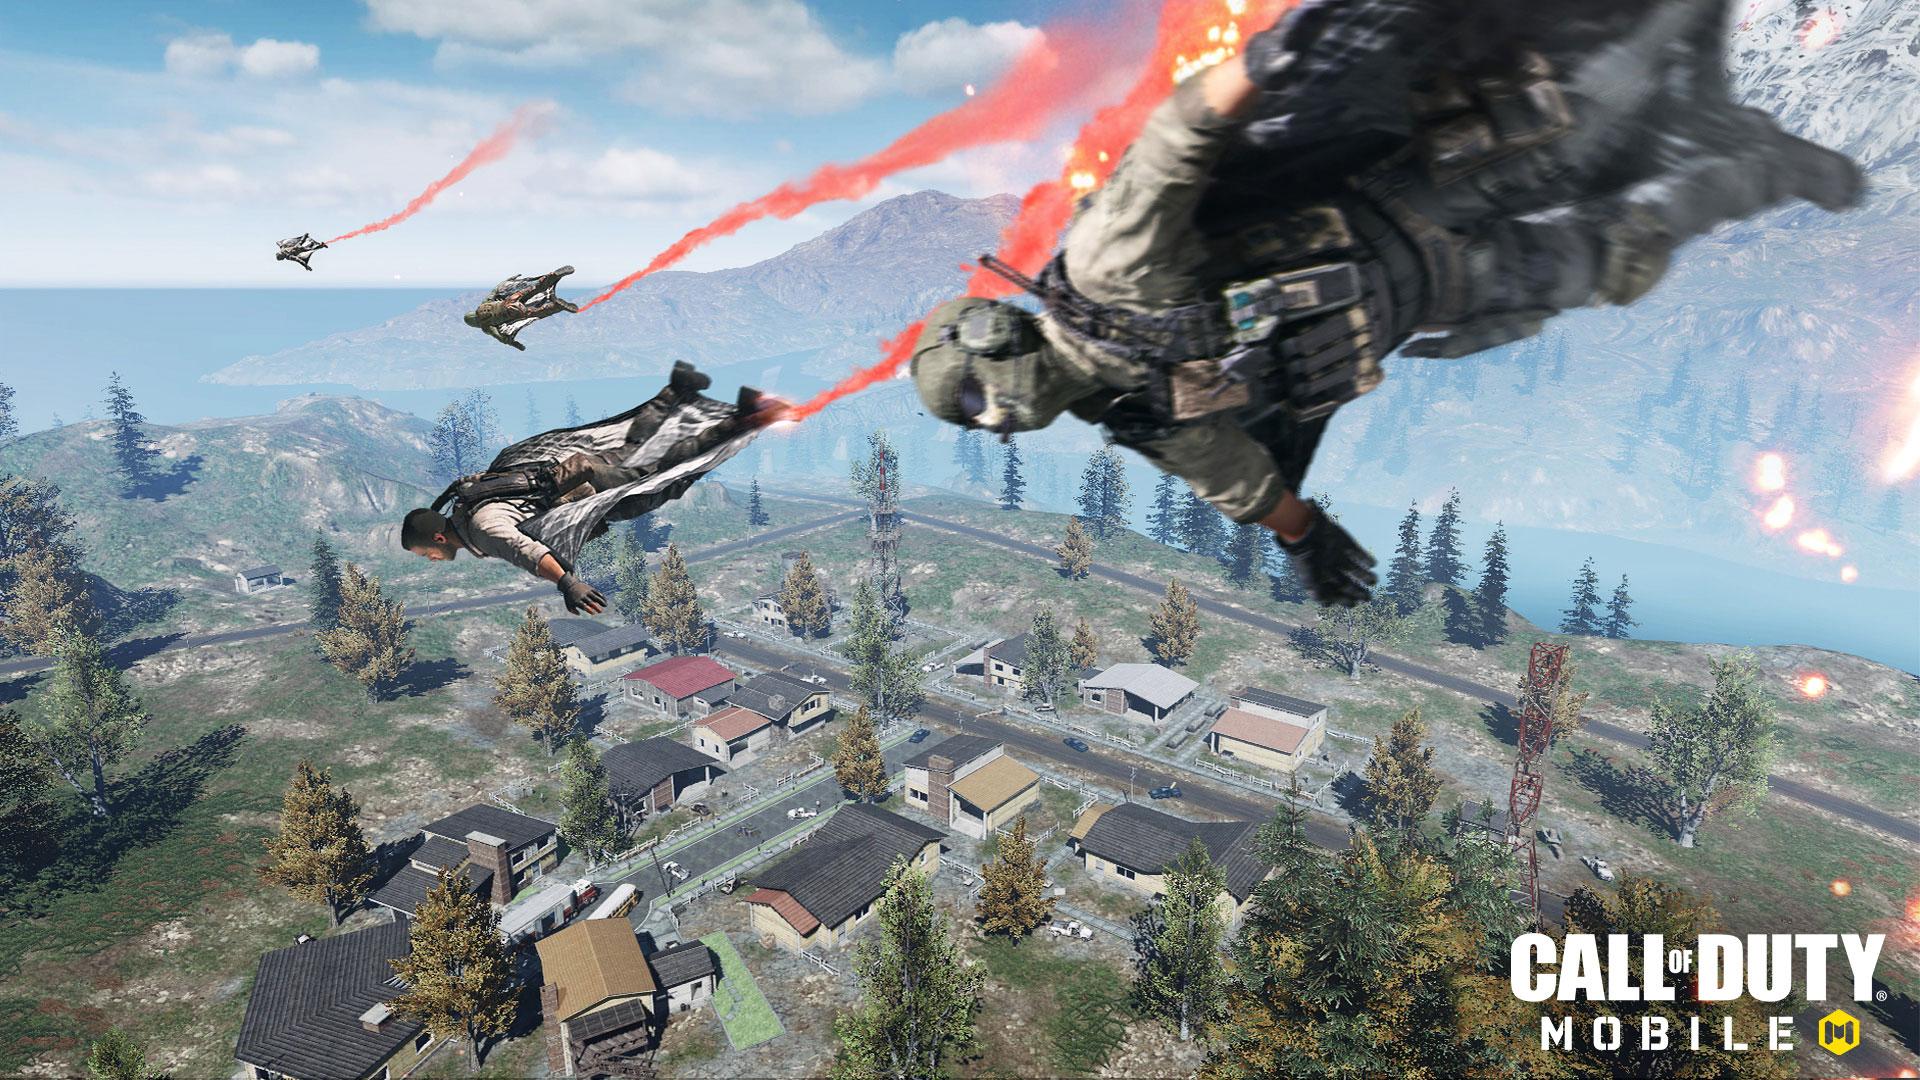 New 'Call of Duty: Mobile' Details Revealed Including a